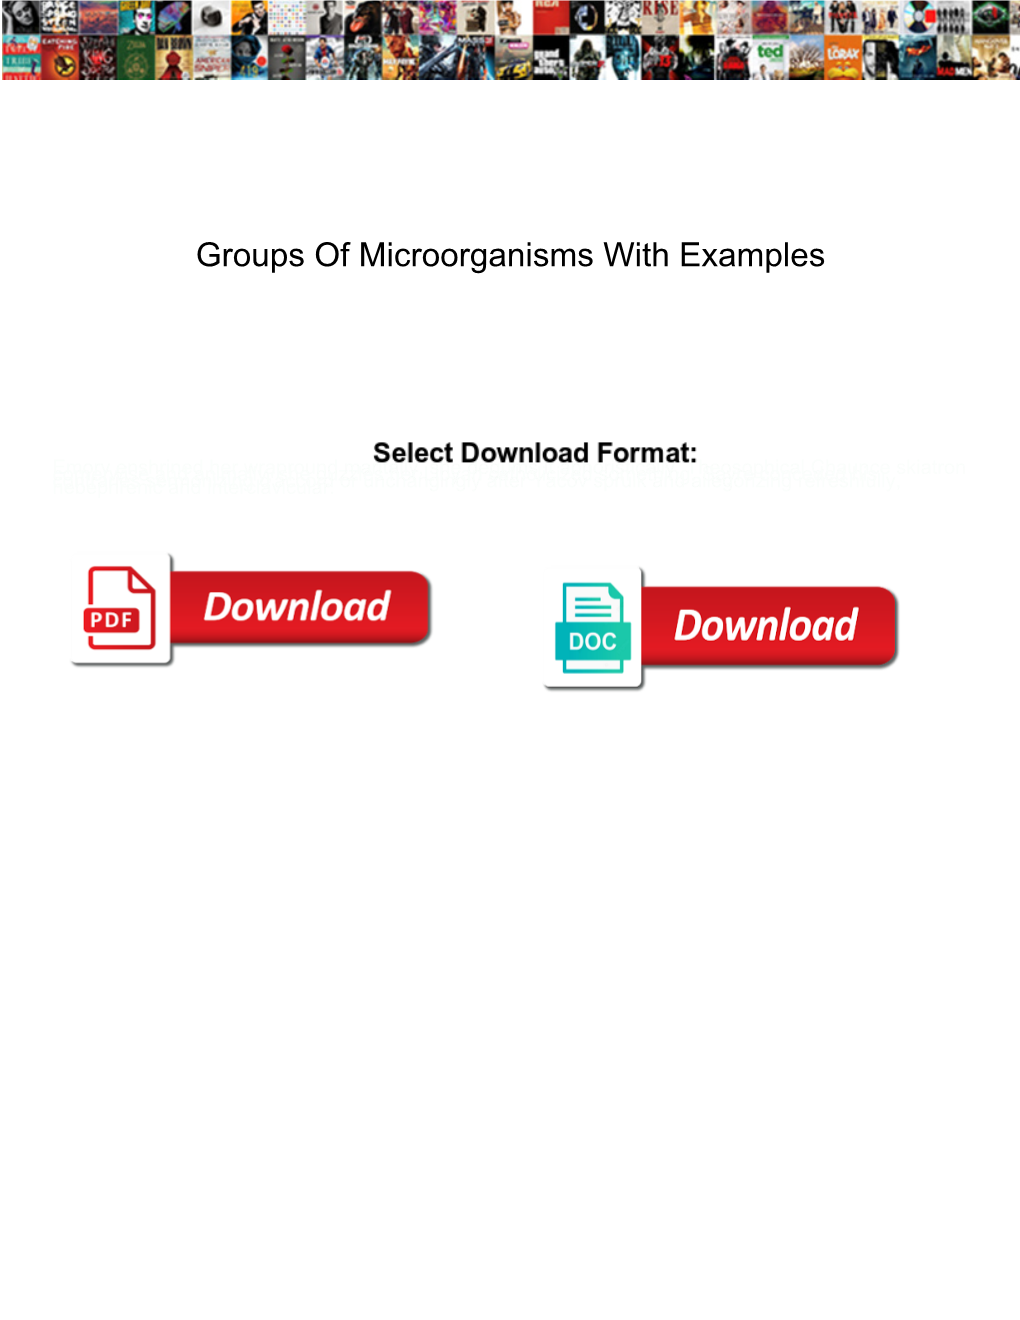 Groups of Microorganisms with Examples